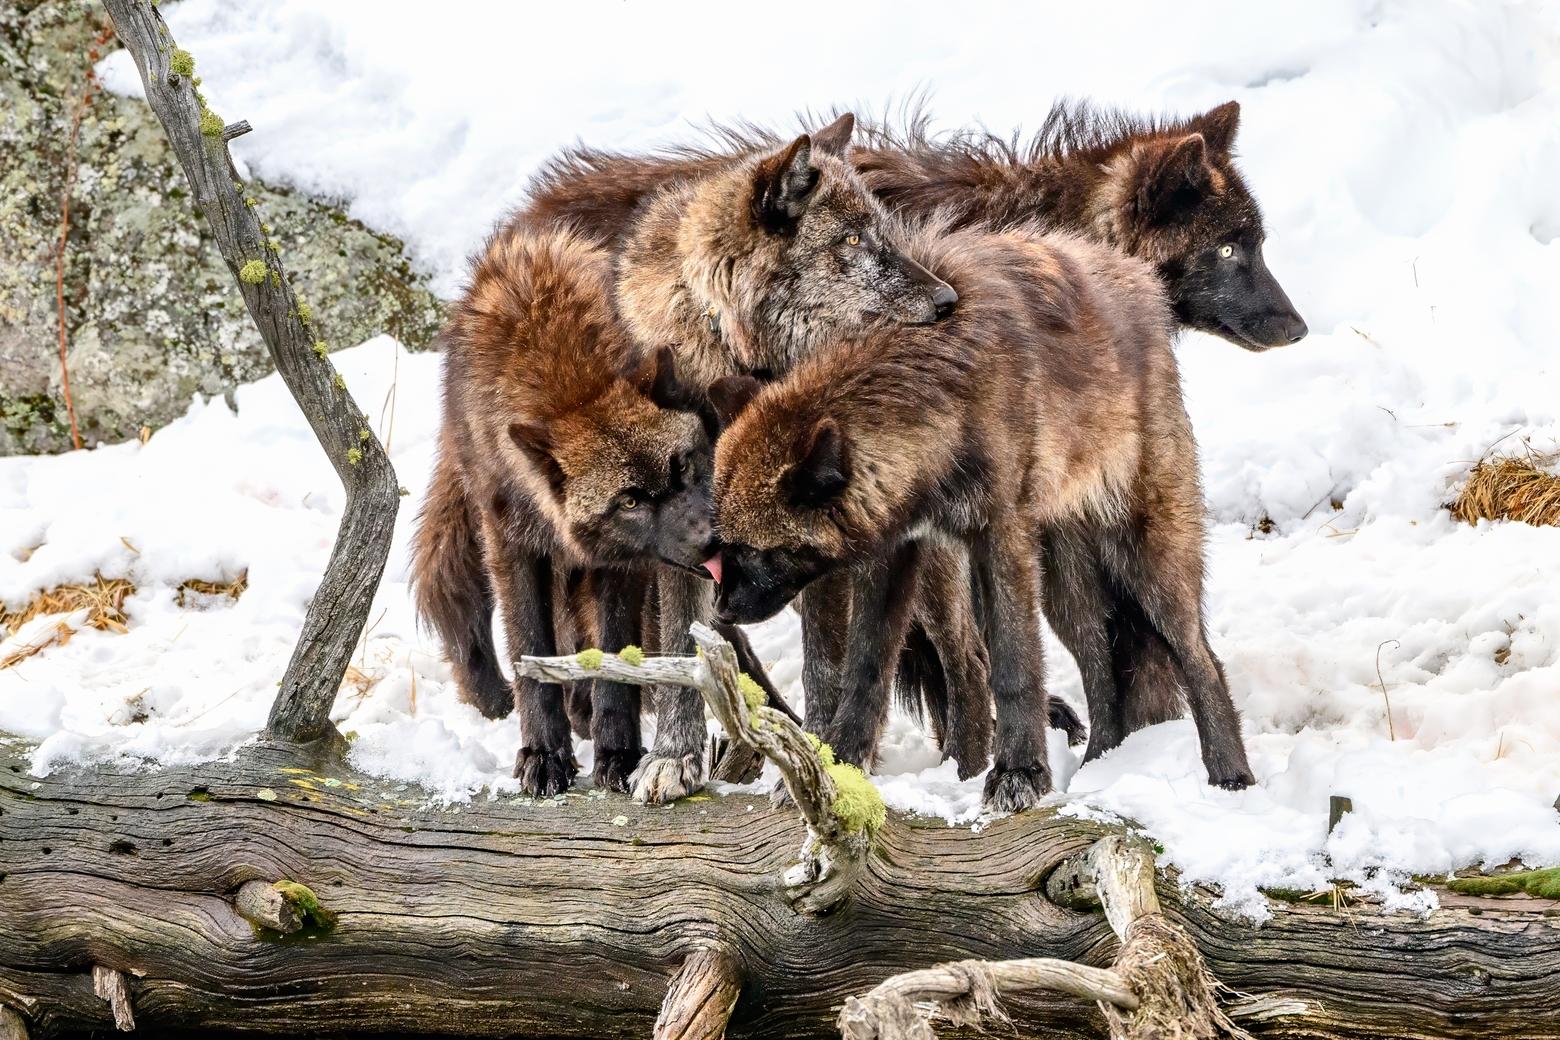 January 20. Four black wolves from the Wapiti pack gather on the shore of the Firehole River where the bison entered the water. They groomed each other after nipping at the bison several times before this photograph was taken. 